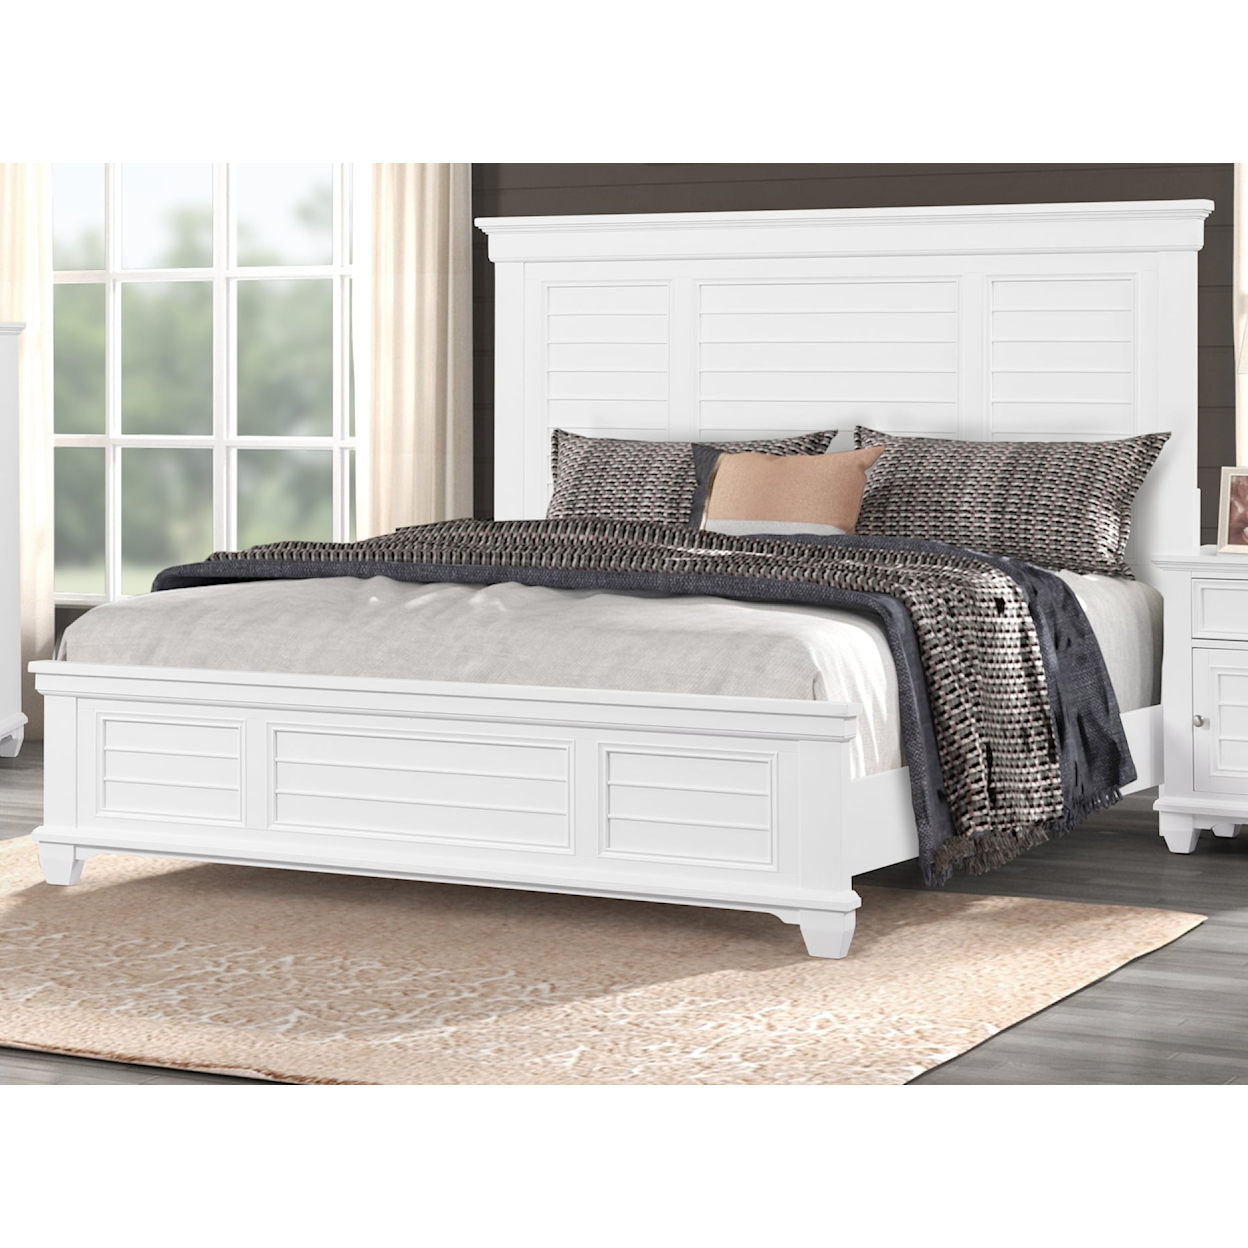 New Classic Furniture Jamestown King Bed